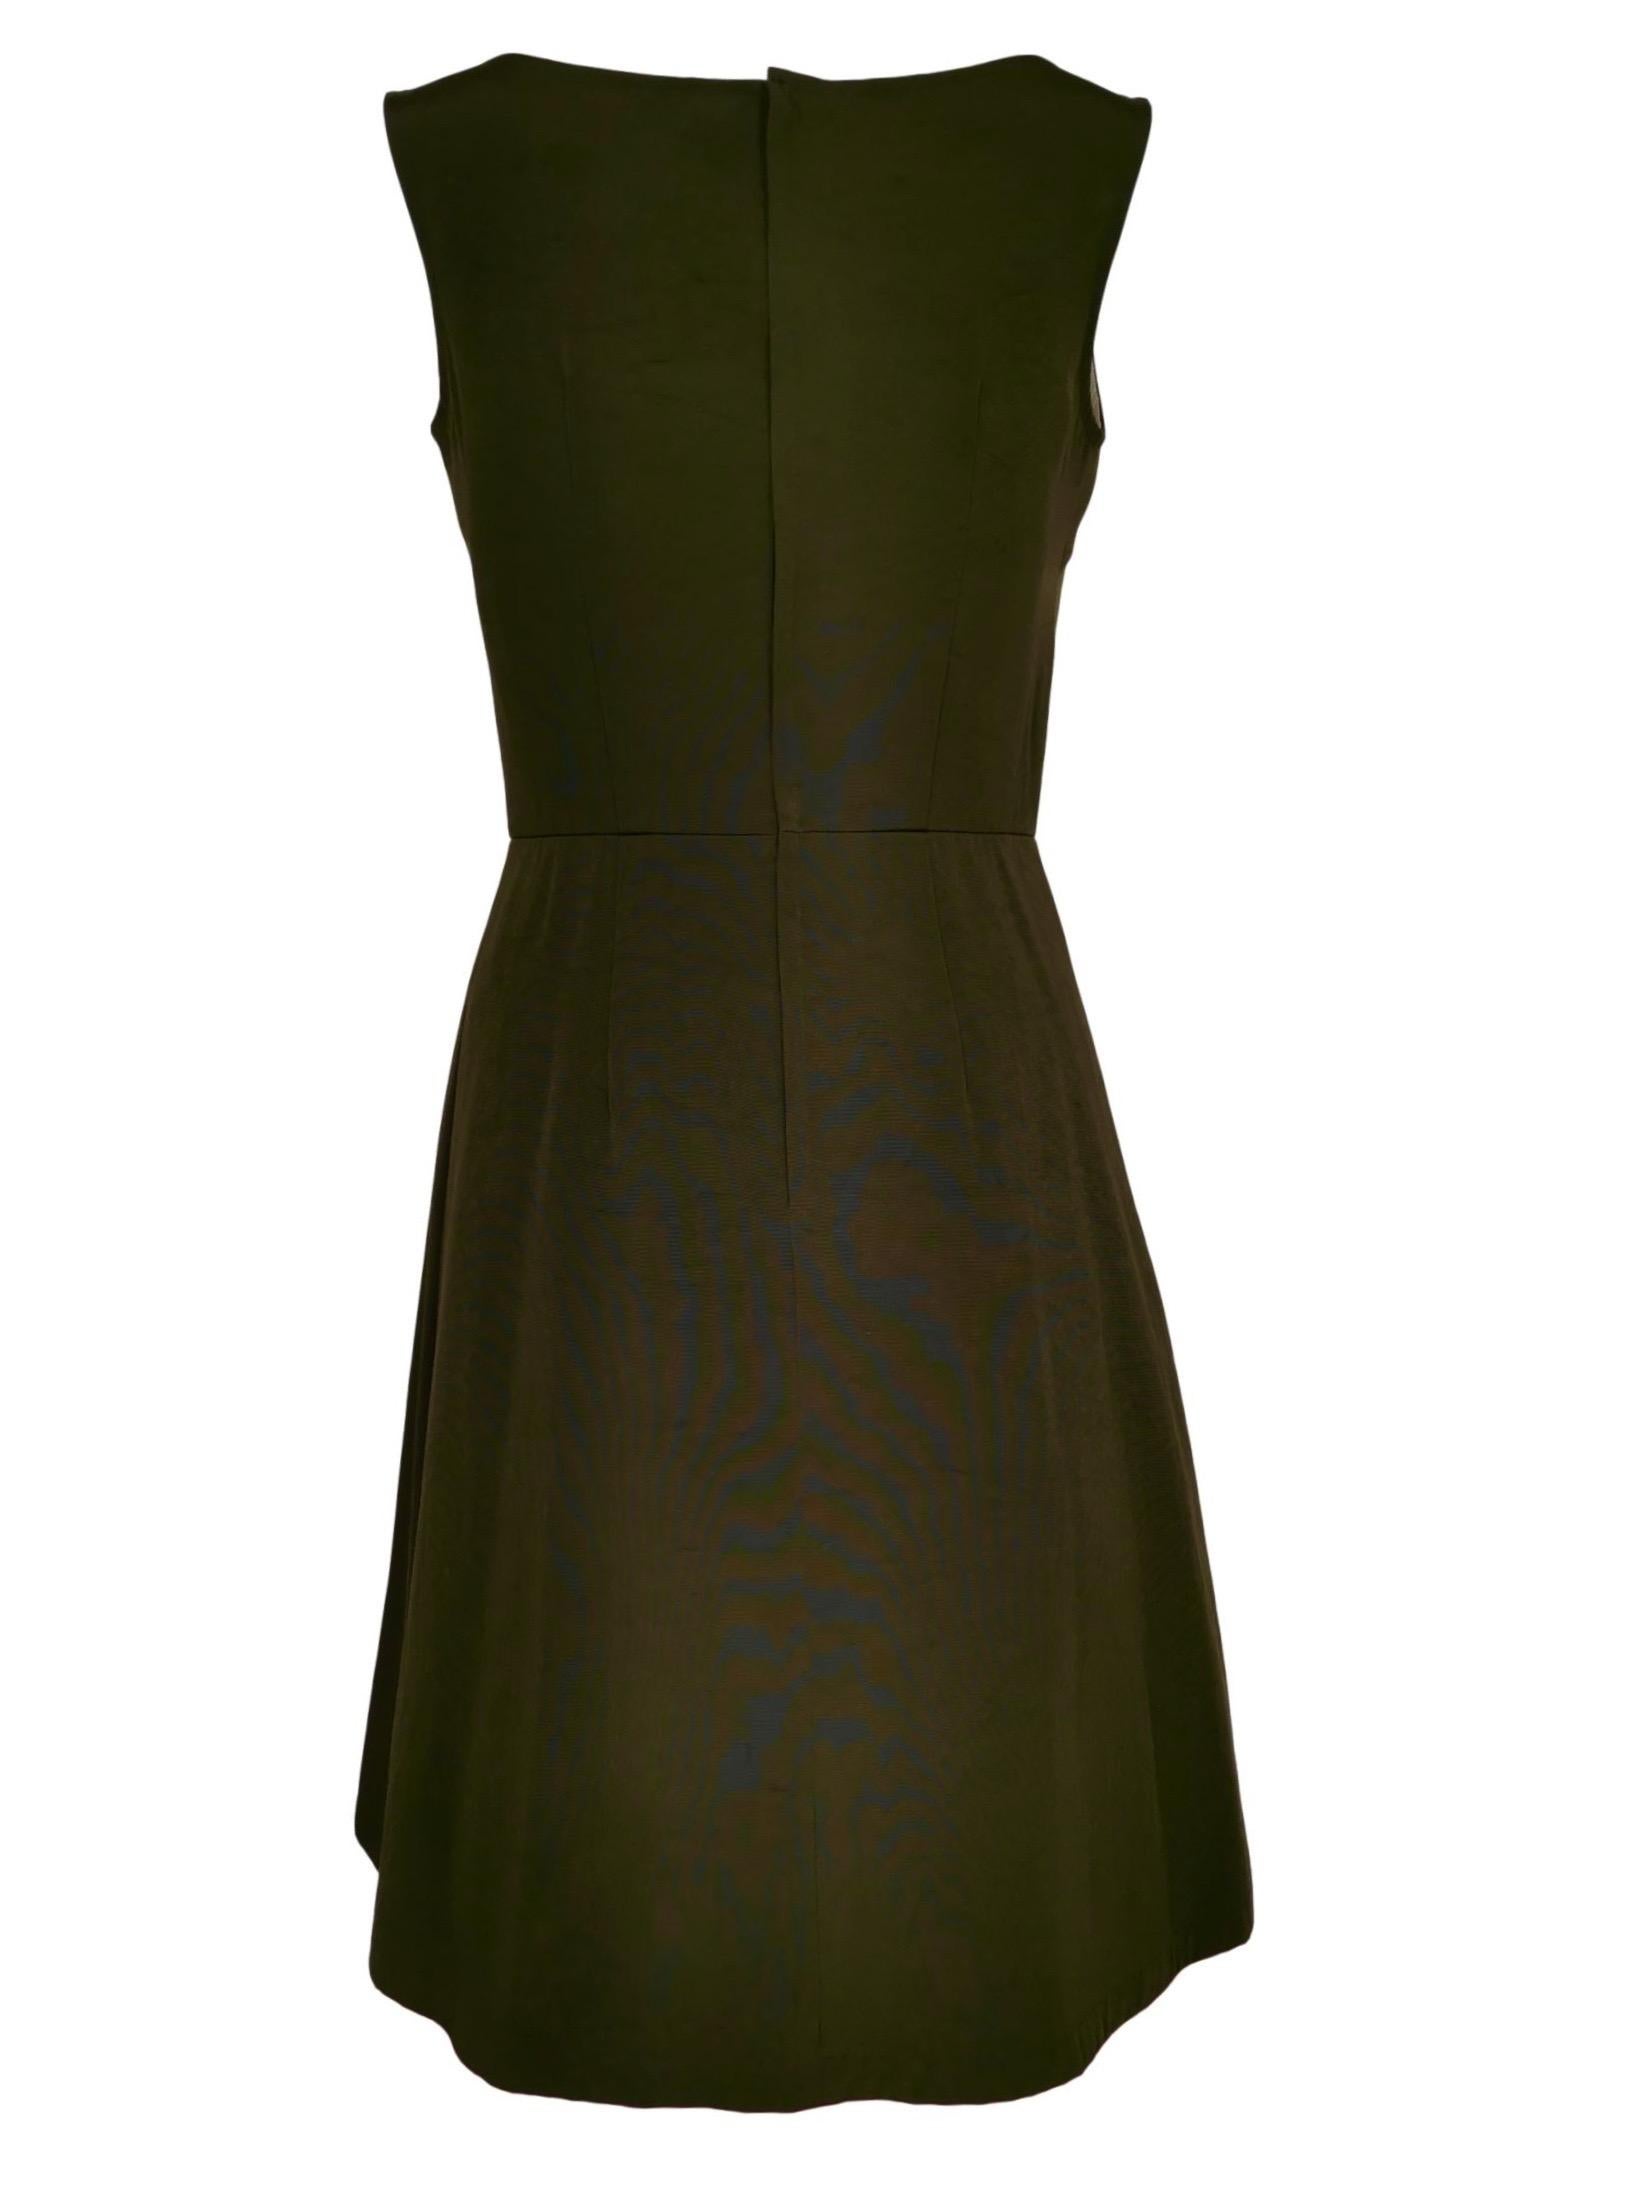 Comme des Garcons Army Green Dress AD 1999 For Sale 9